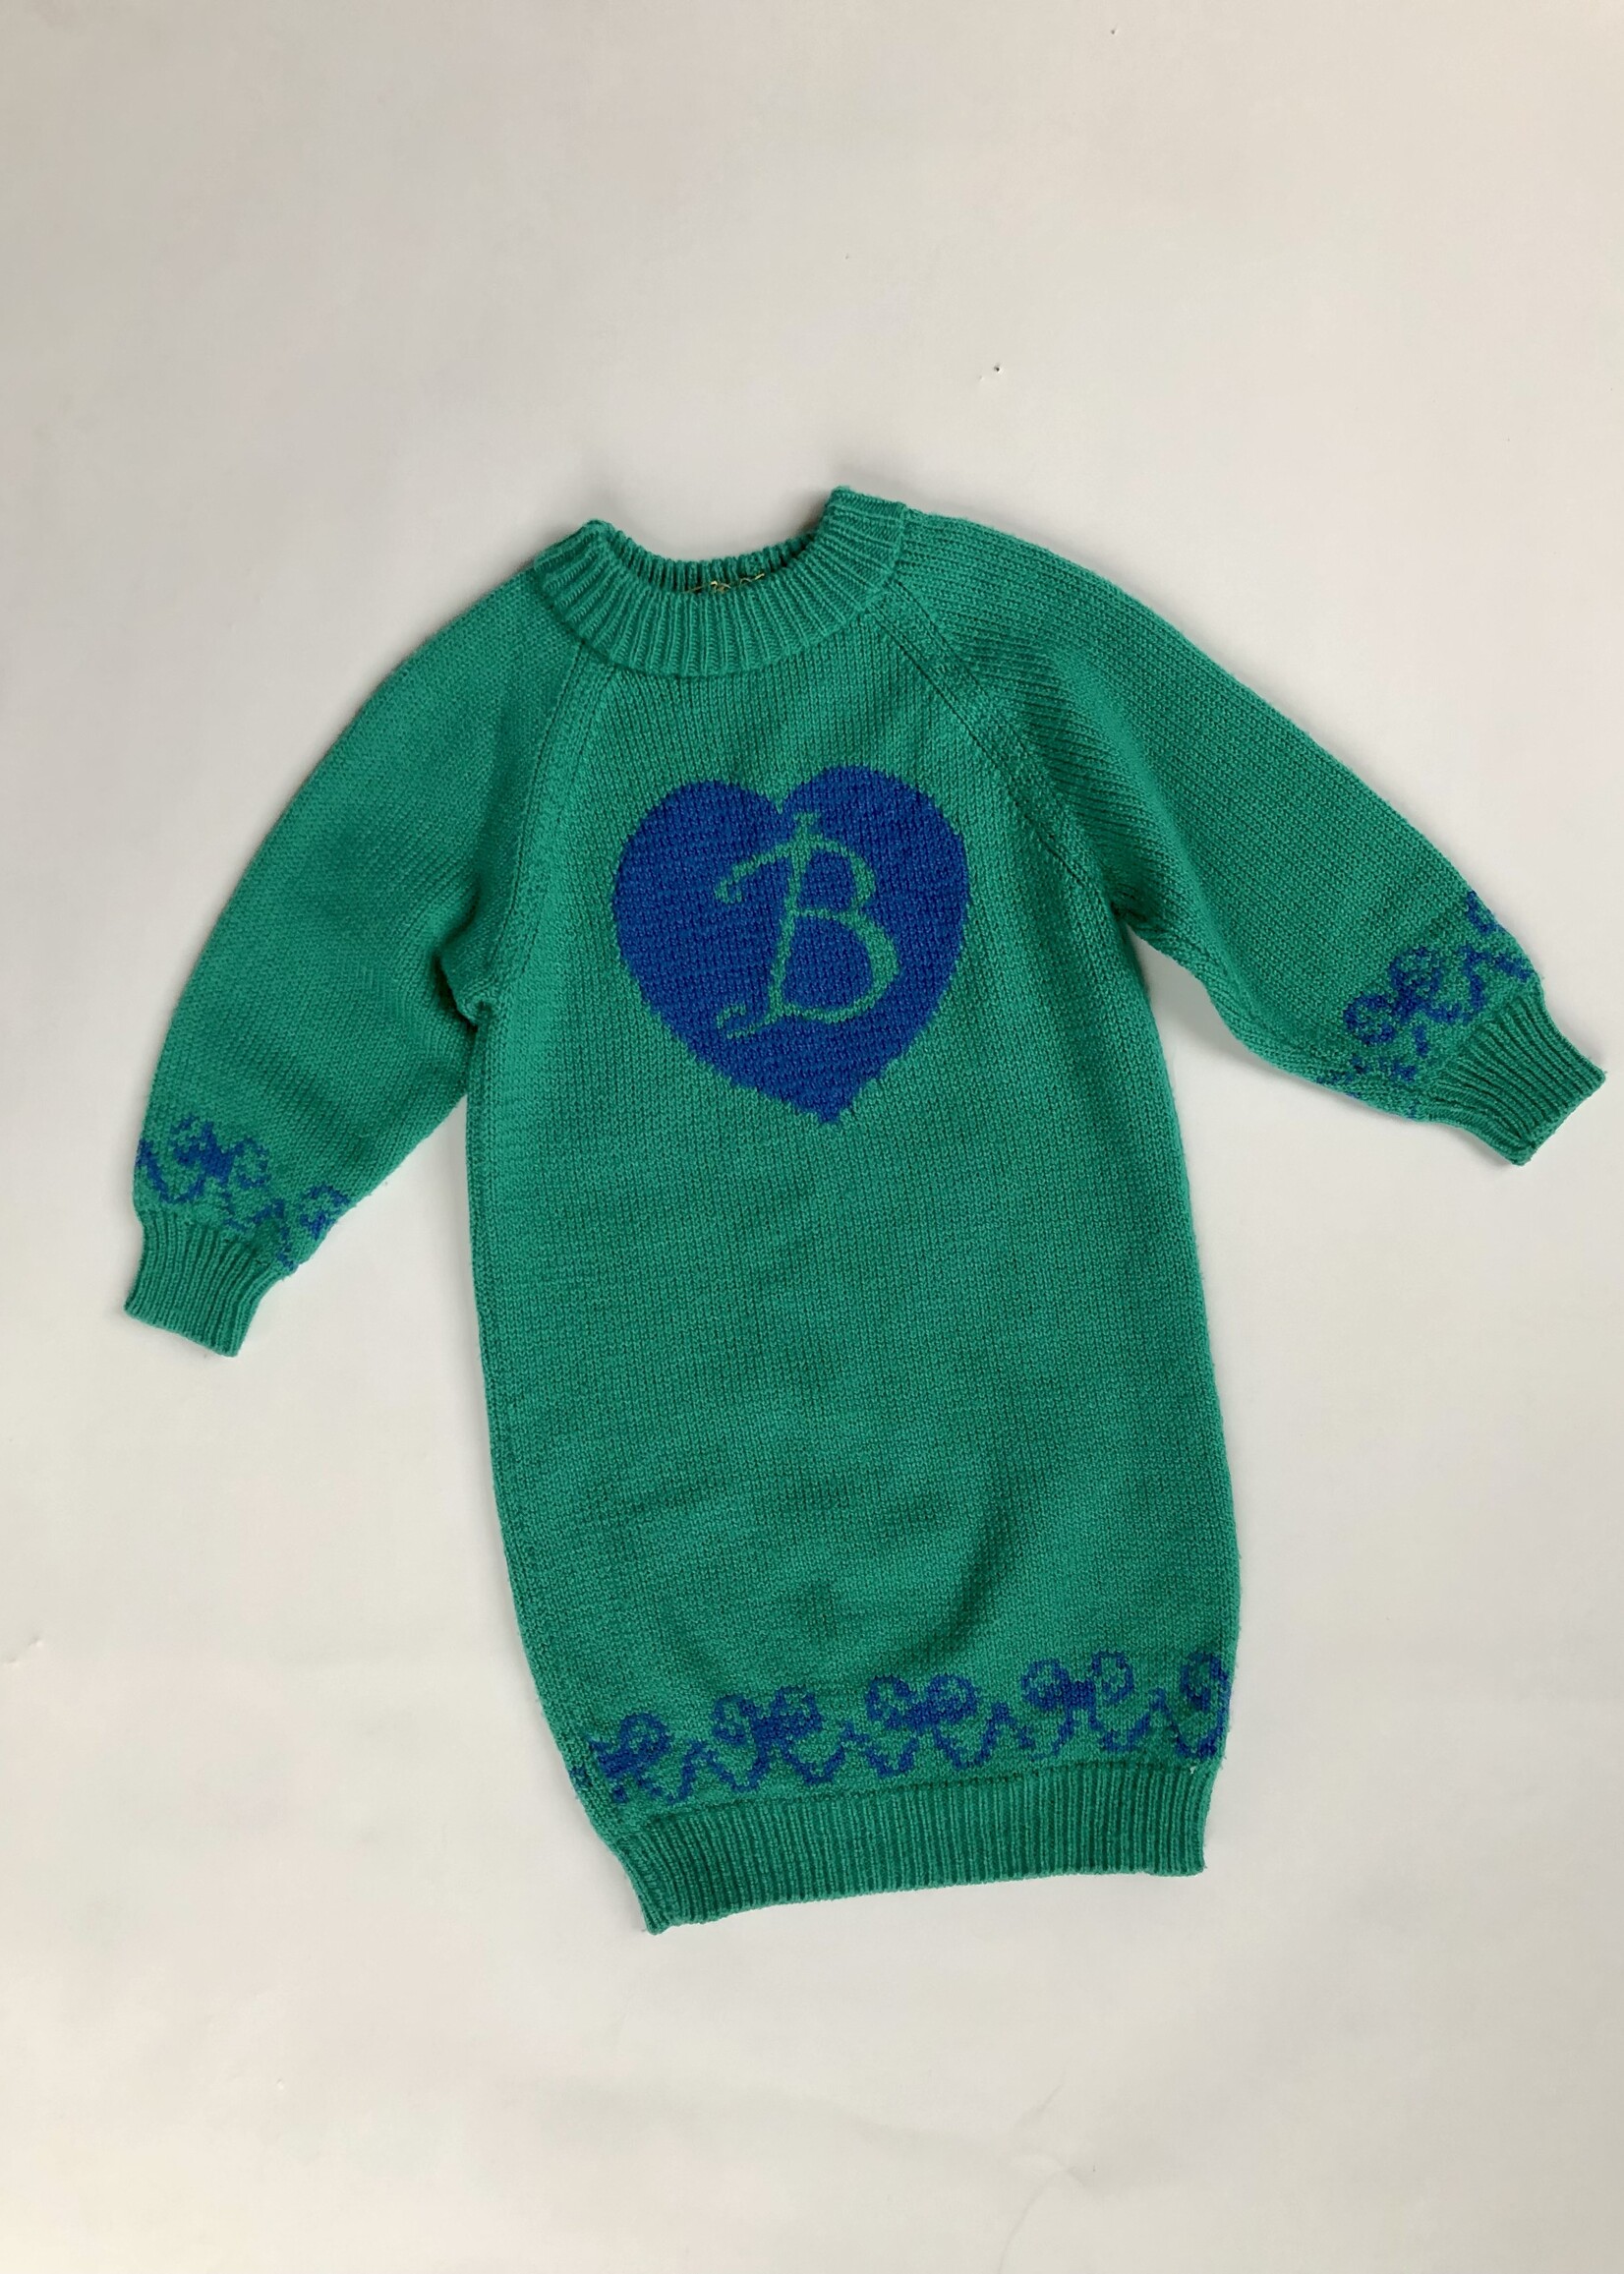 Knitted Barbie sweater dress 5-6y